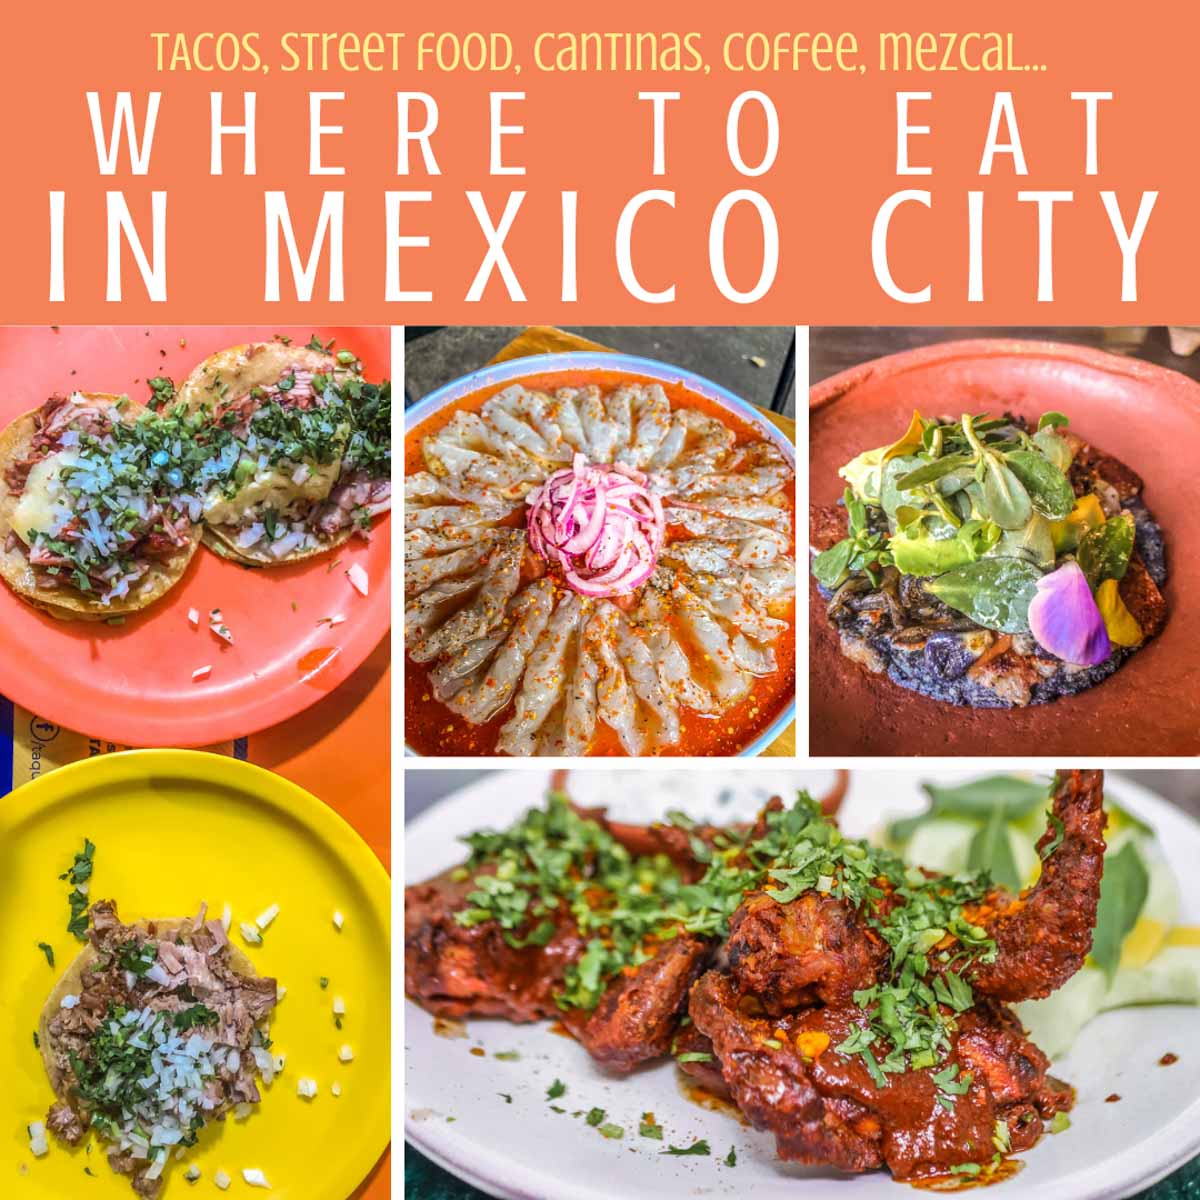 Copy of where to eat in mexico city tacos street food cantinas c